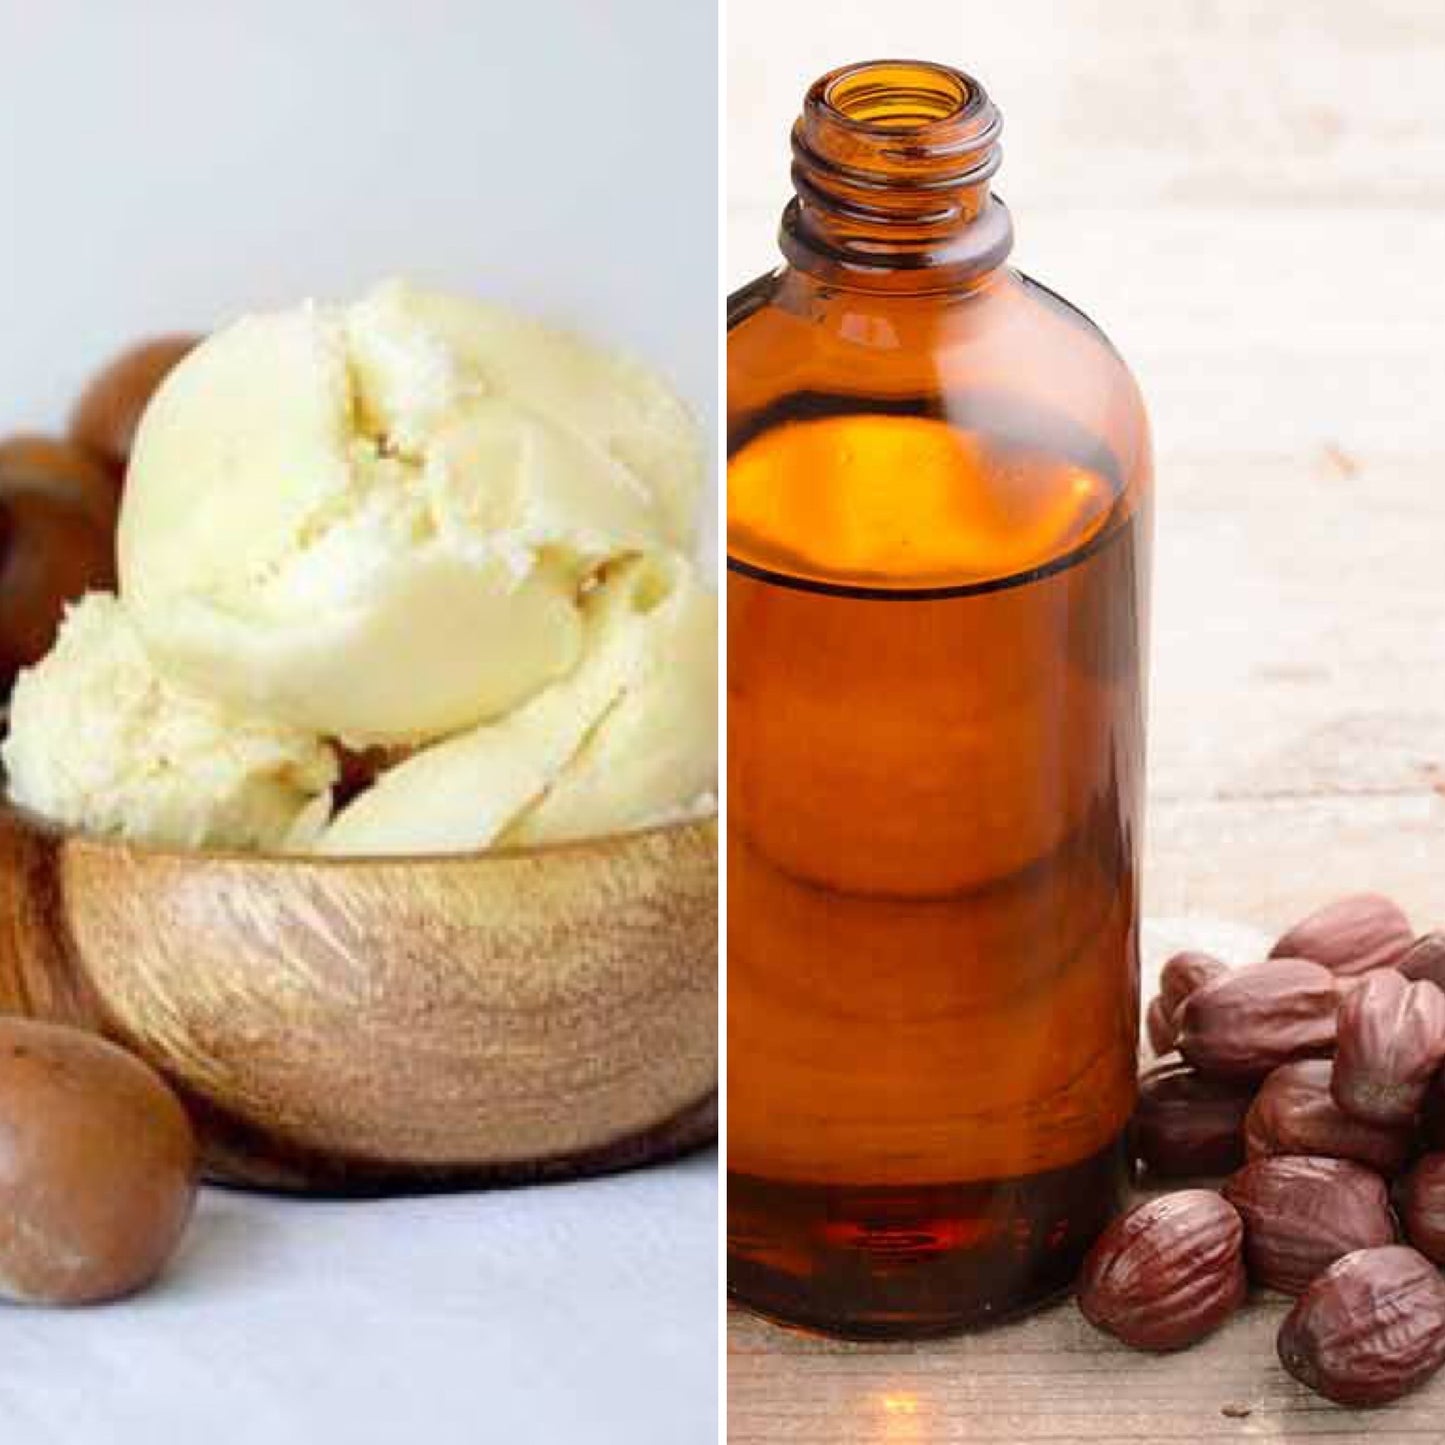 Shea butter in a wooden bowl and jojoba oil in a glass bottle, ingredients in The Good Soap shea and jojoba soap bar